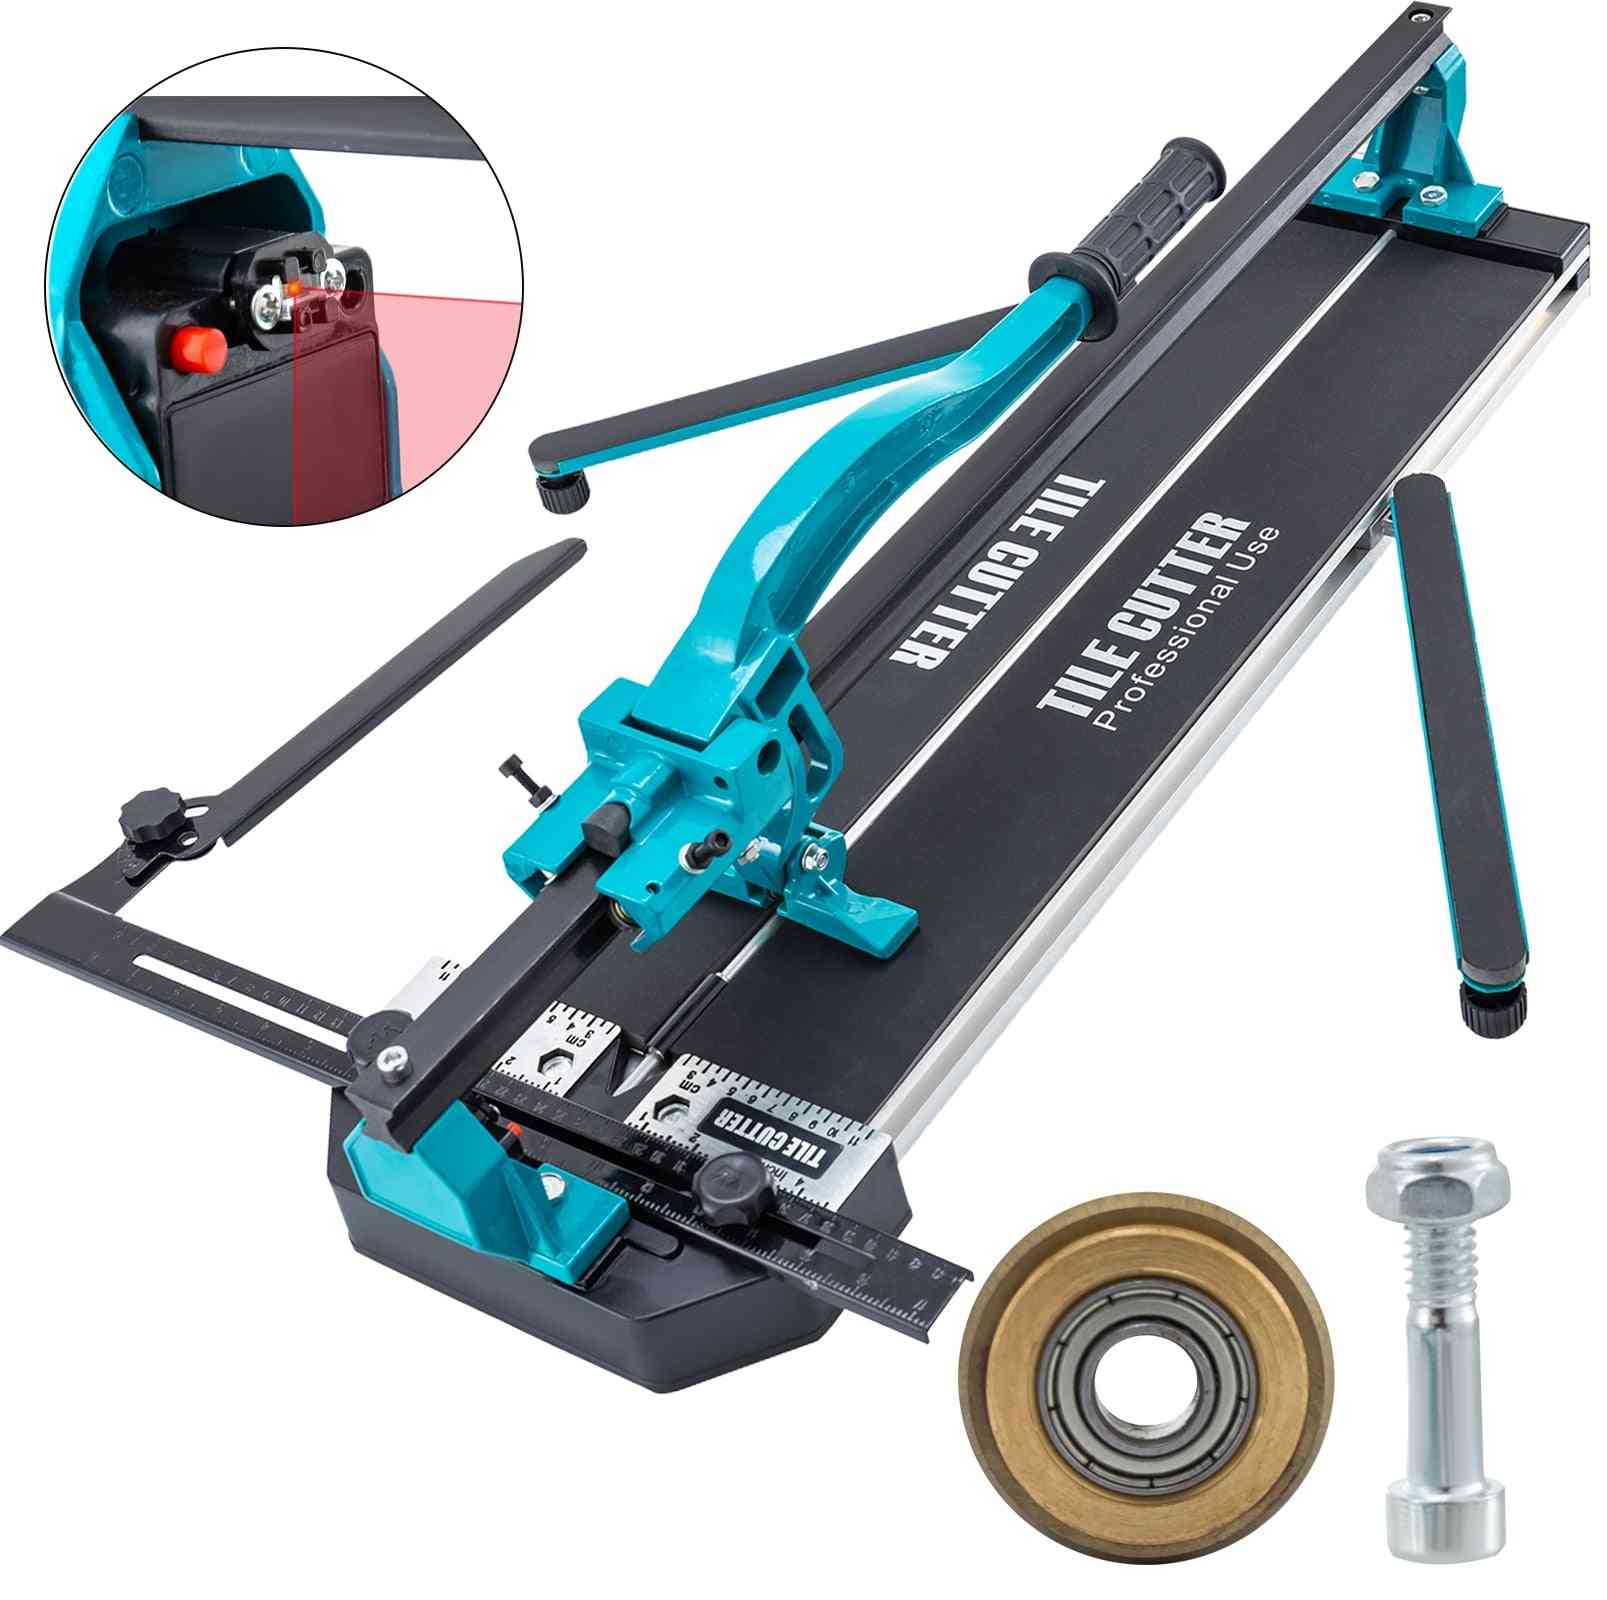 Manual Tile Cutter - Laser Positioning Max Cutting